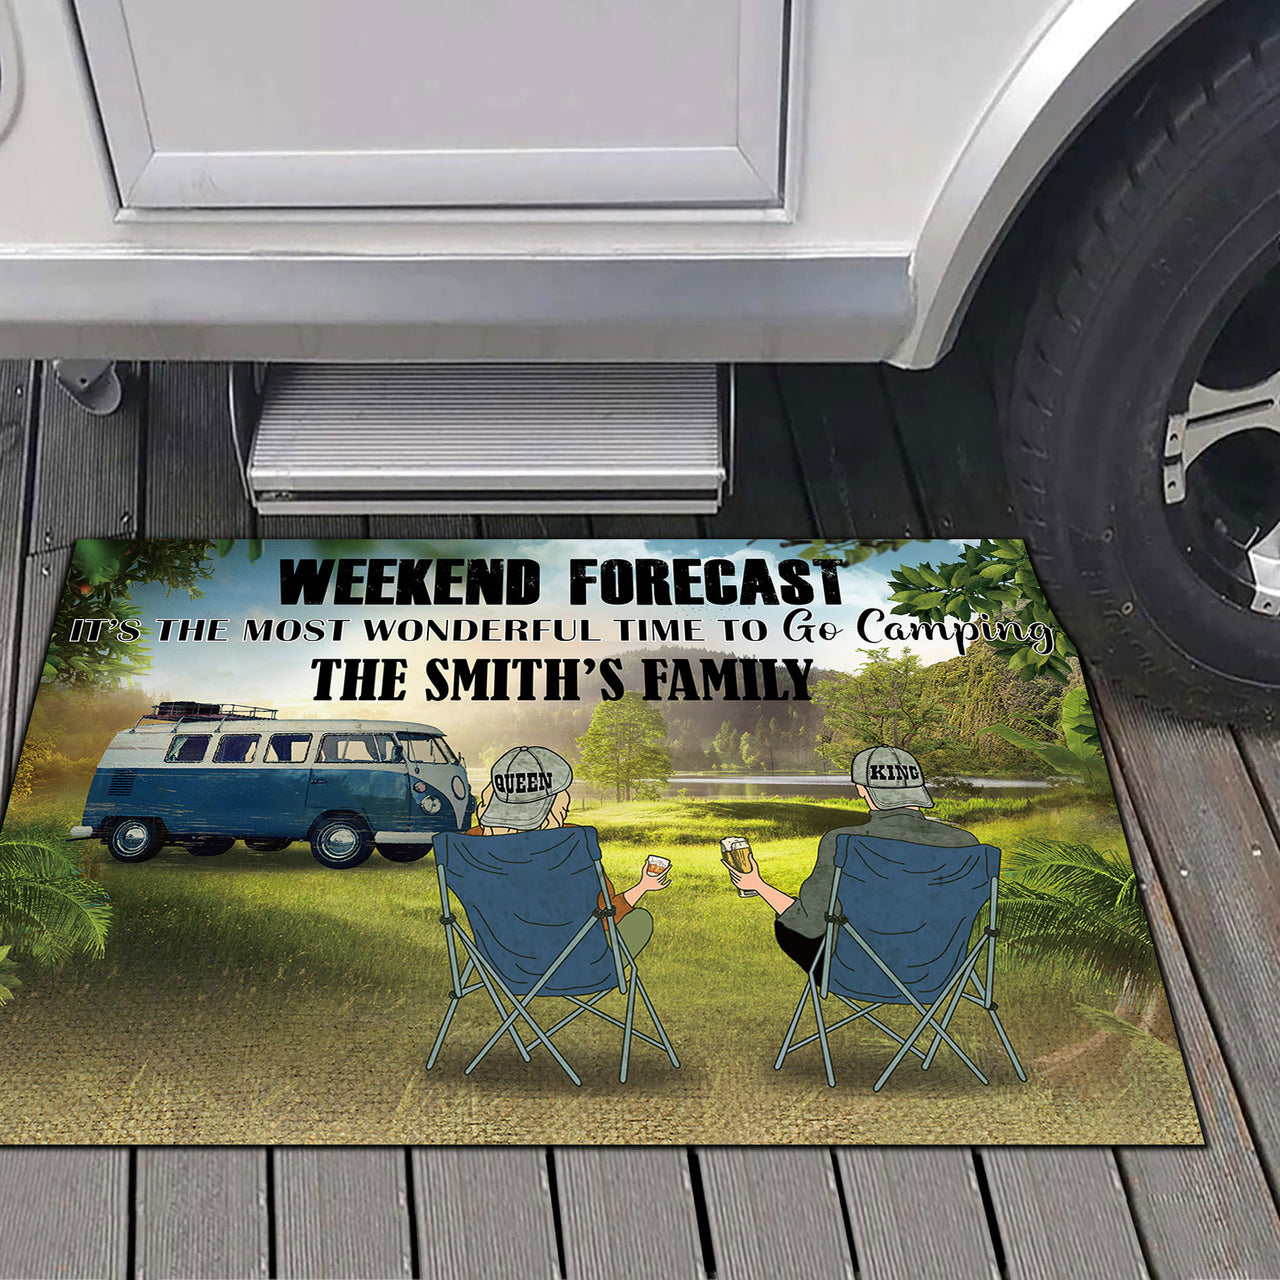 Weekend Forecast It's The Most Wonderful Time To Go Camping -Personalized RVs Doormat AB